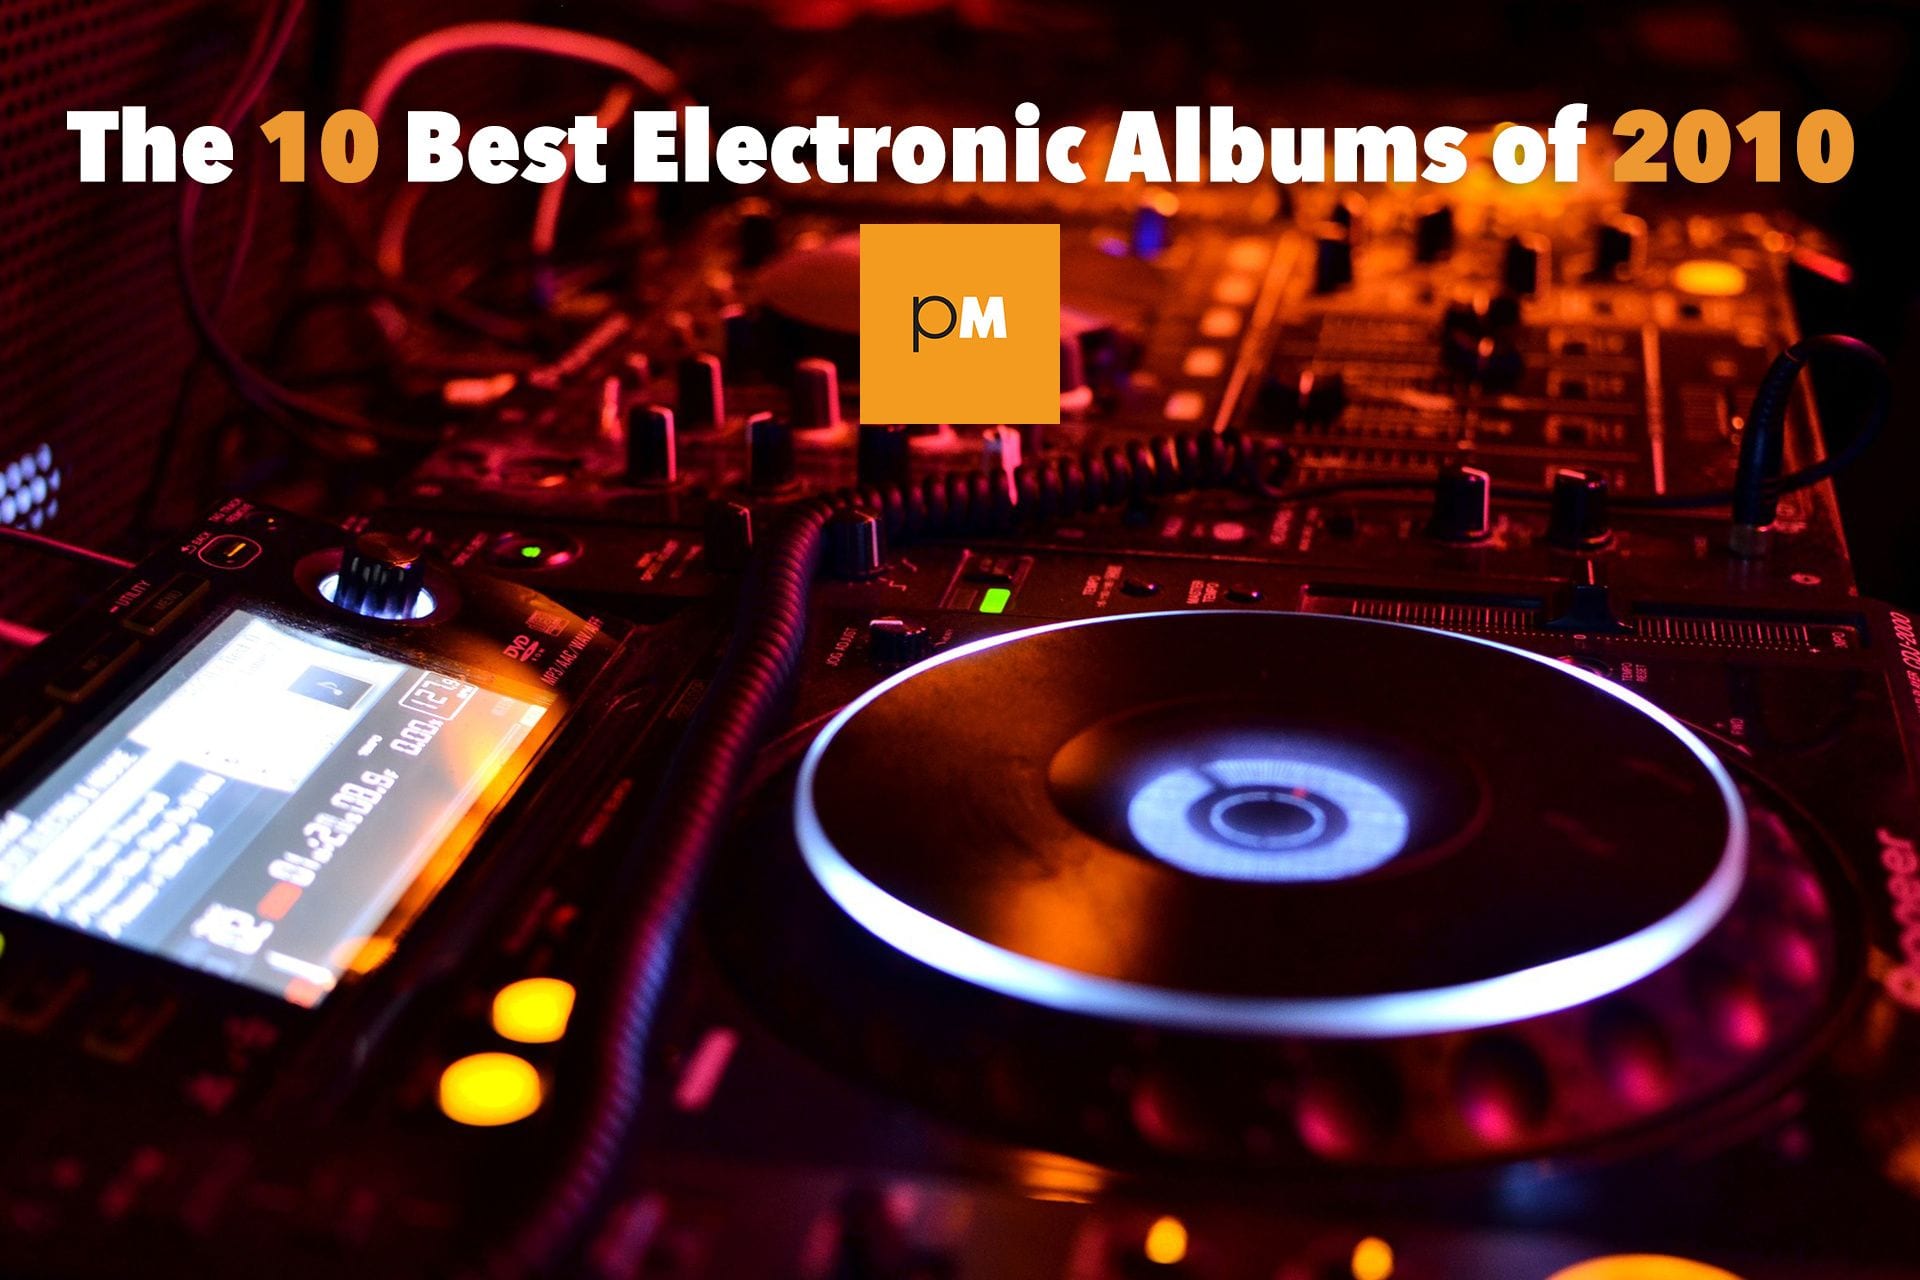 The 10 Best Electronic Albums of 2010